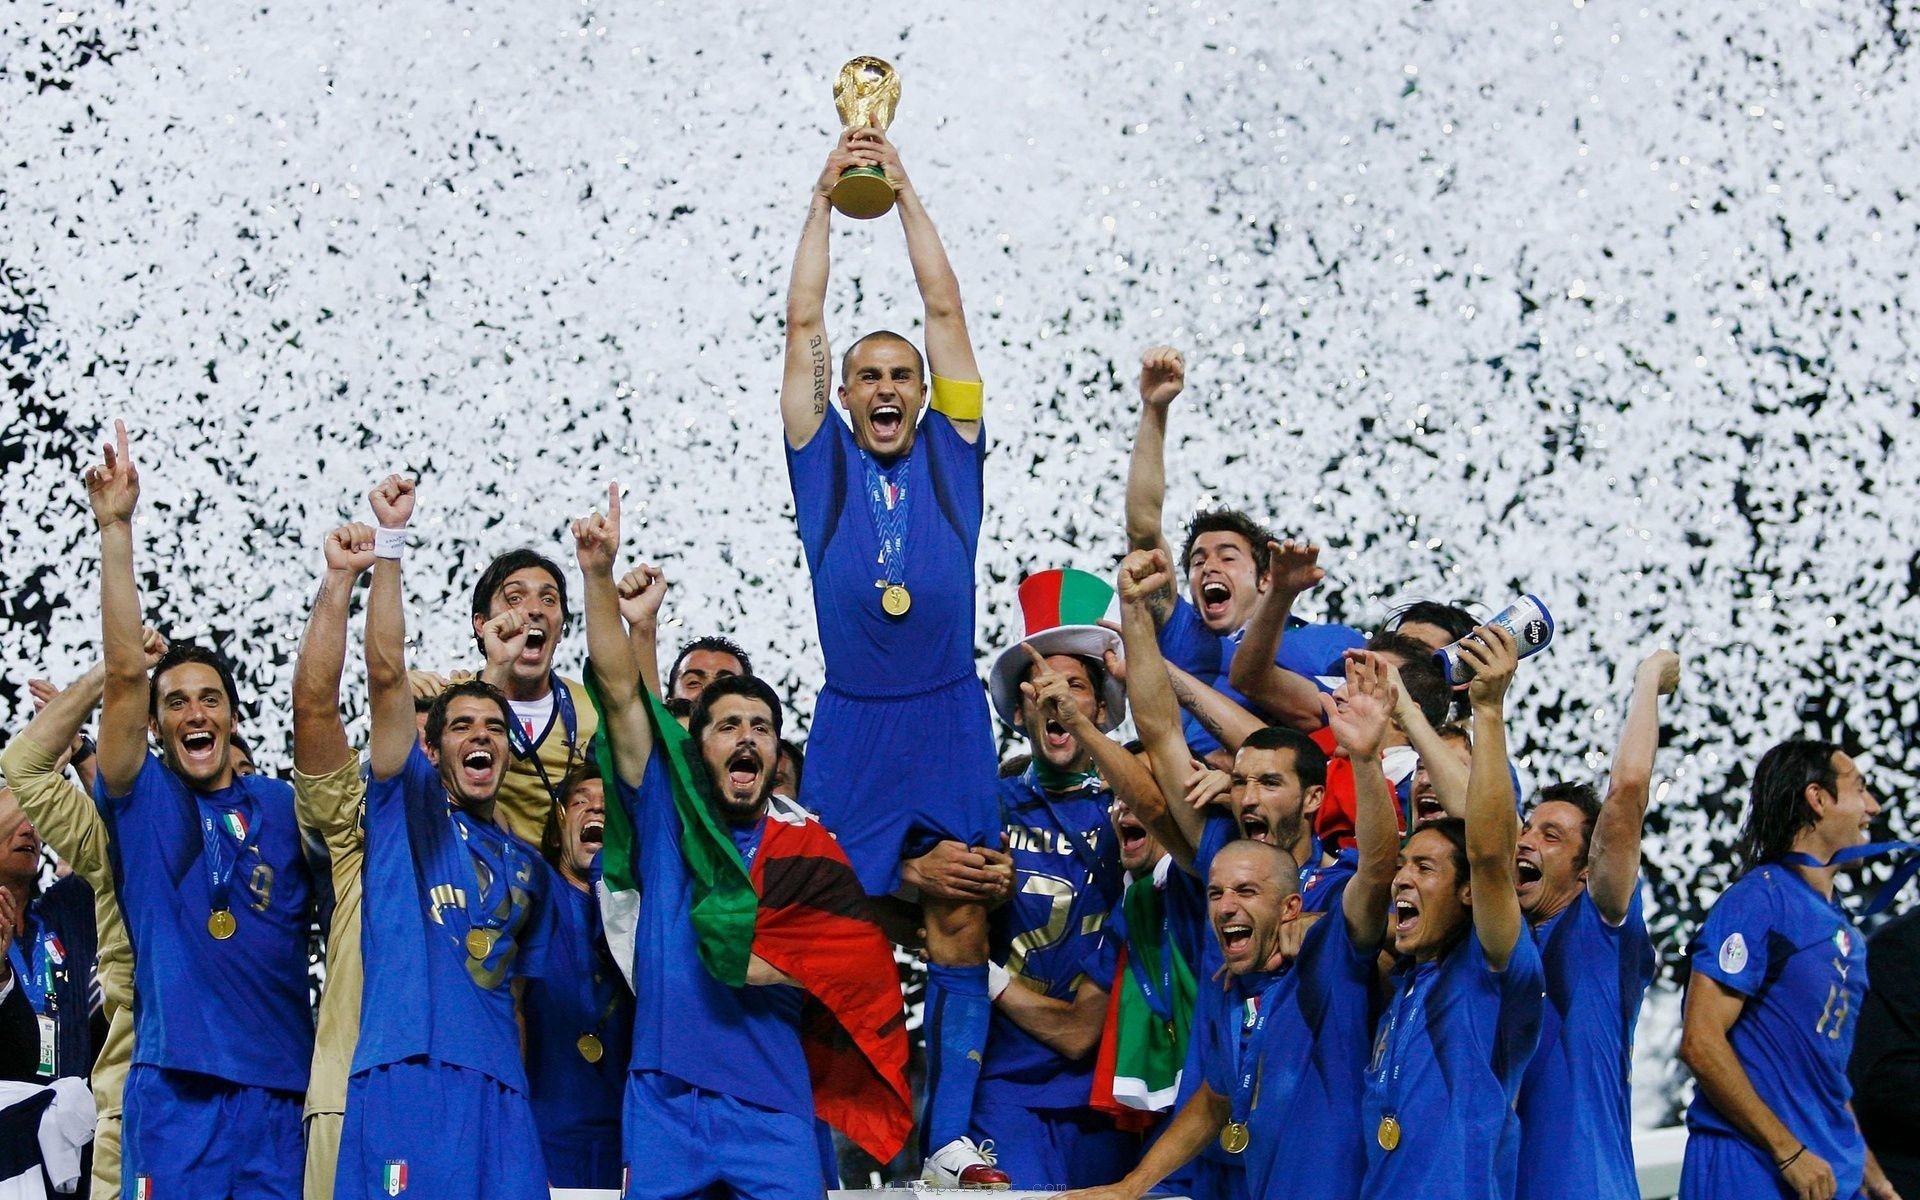 fifa, Italy, World, Cup, Soccer, Italian, 14 Wallpaper HD / Desktop and Mobile Background